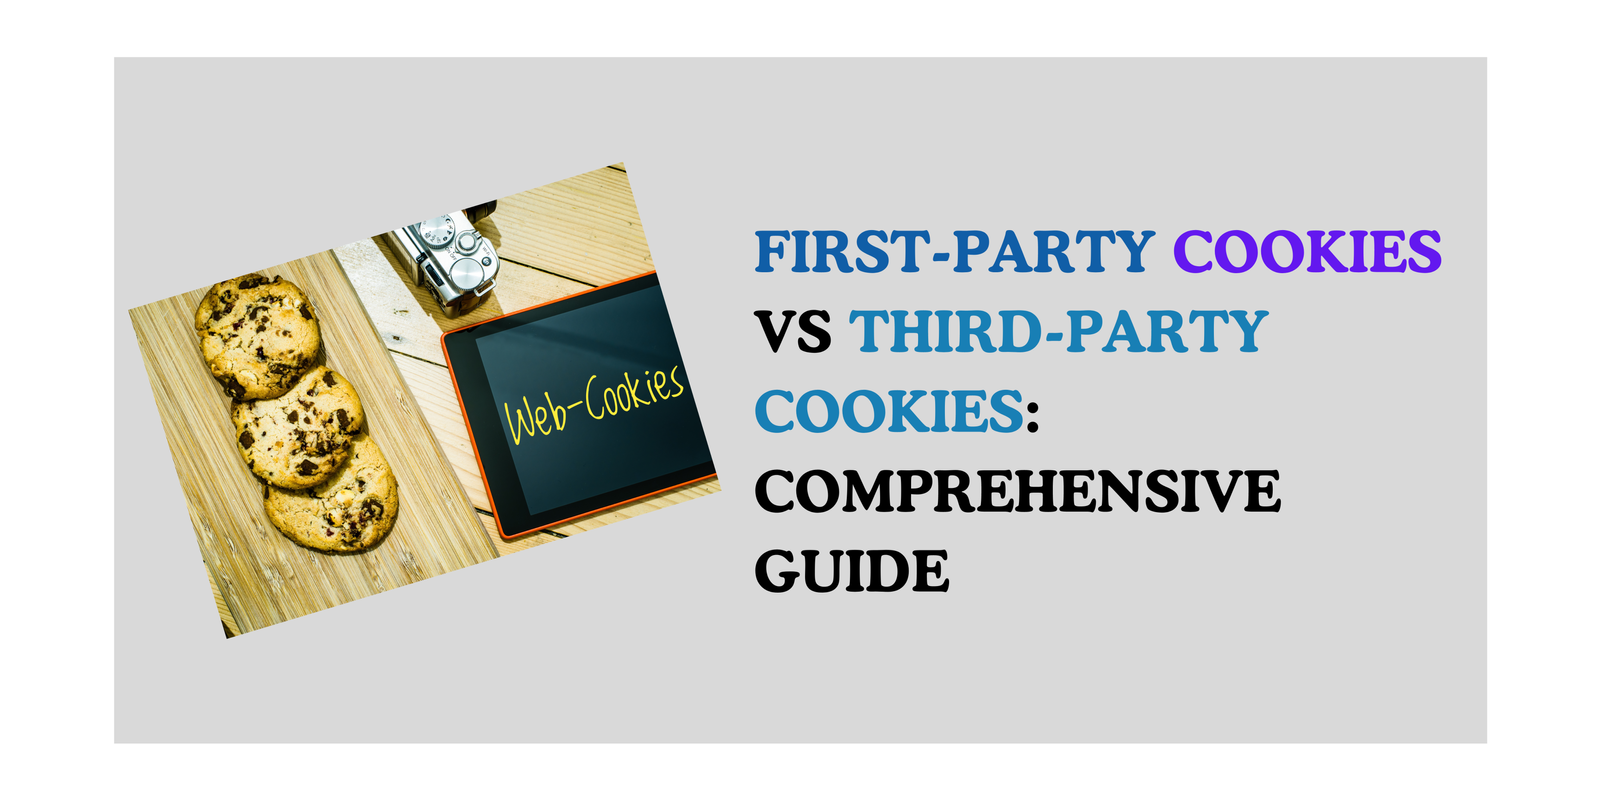 First-Party Cookies vs Third-Party Cookies: Comprehensive Guide